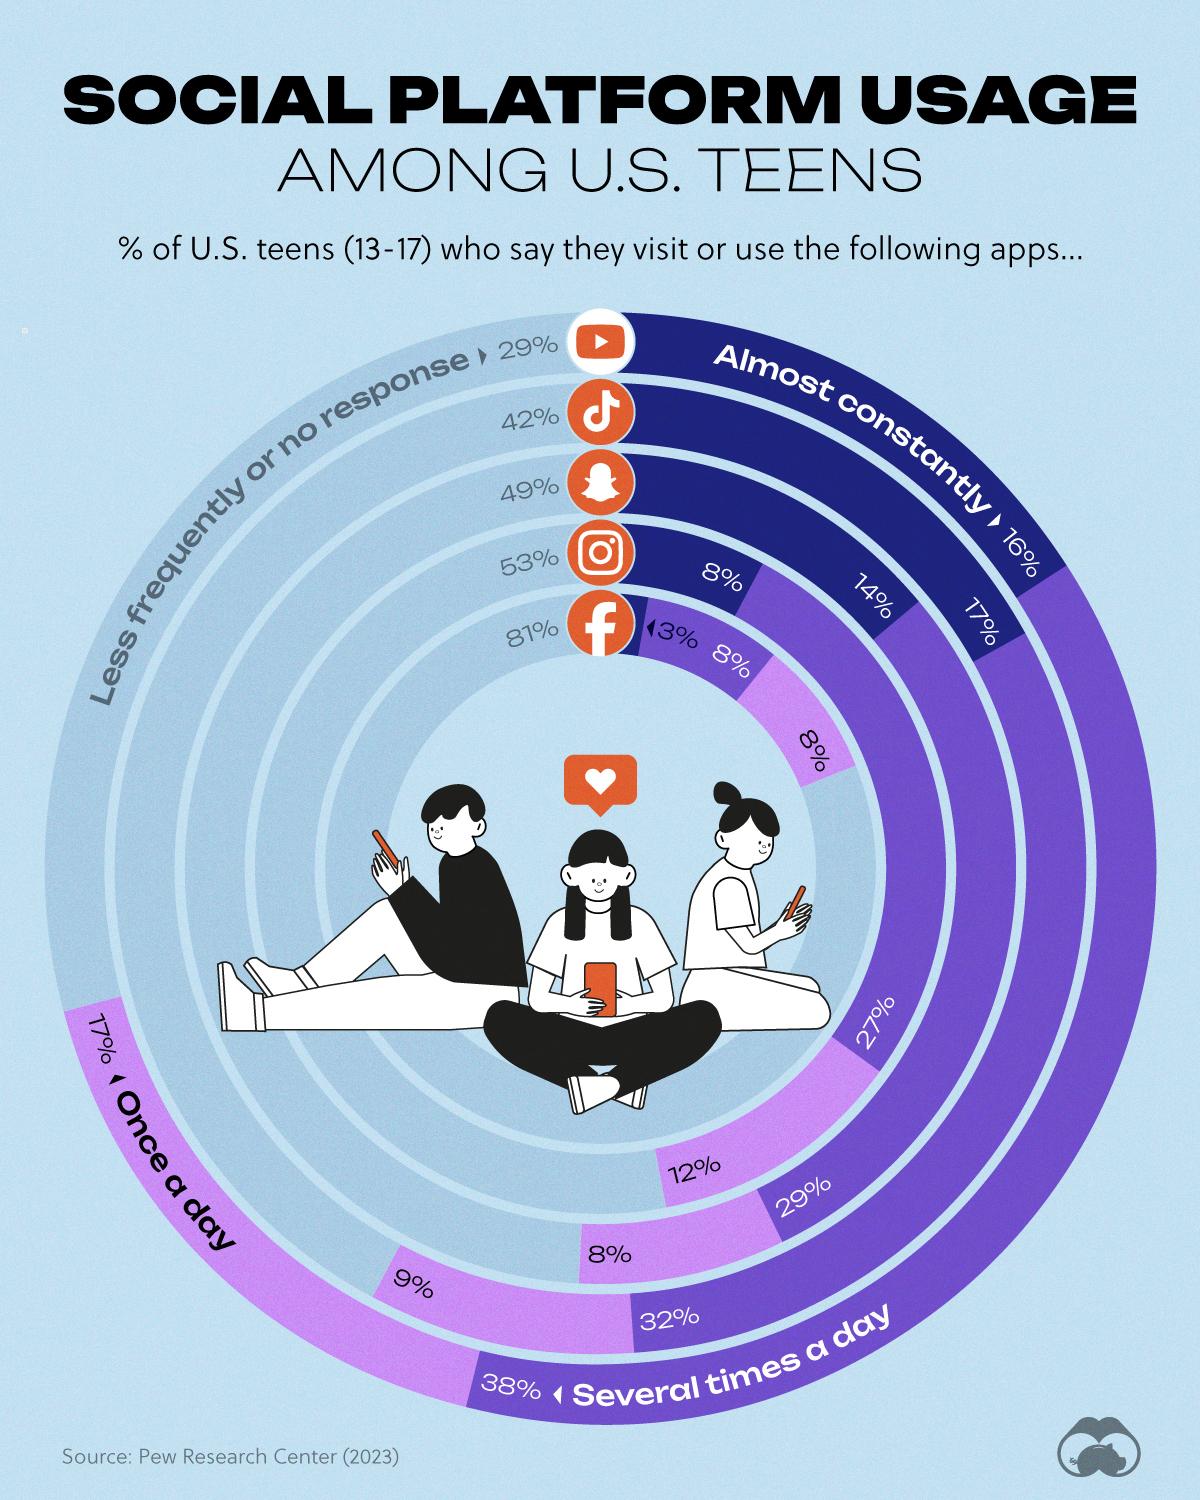 A Growing Number of Teens Use Social Media "Almost Constantly"